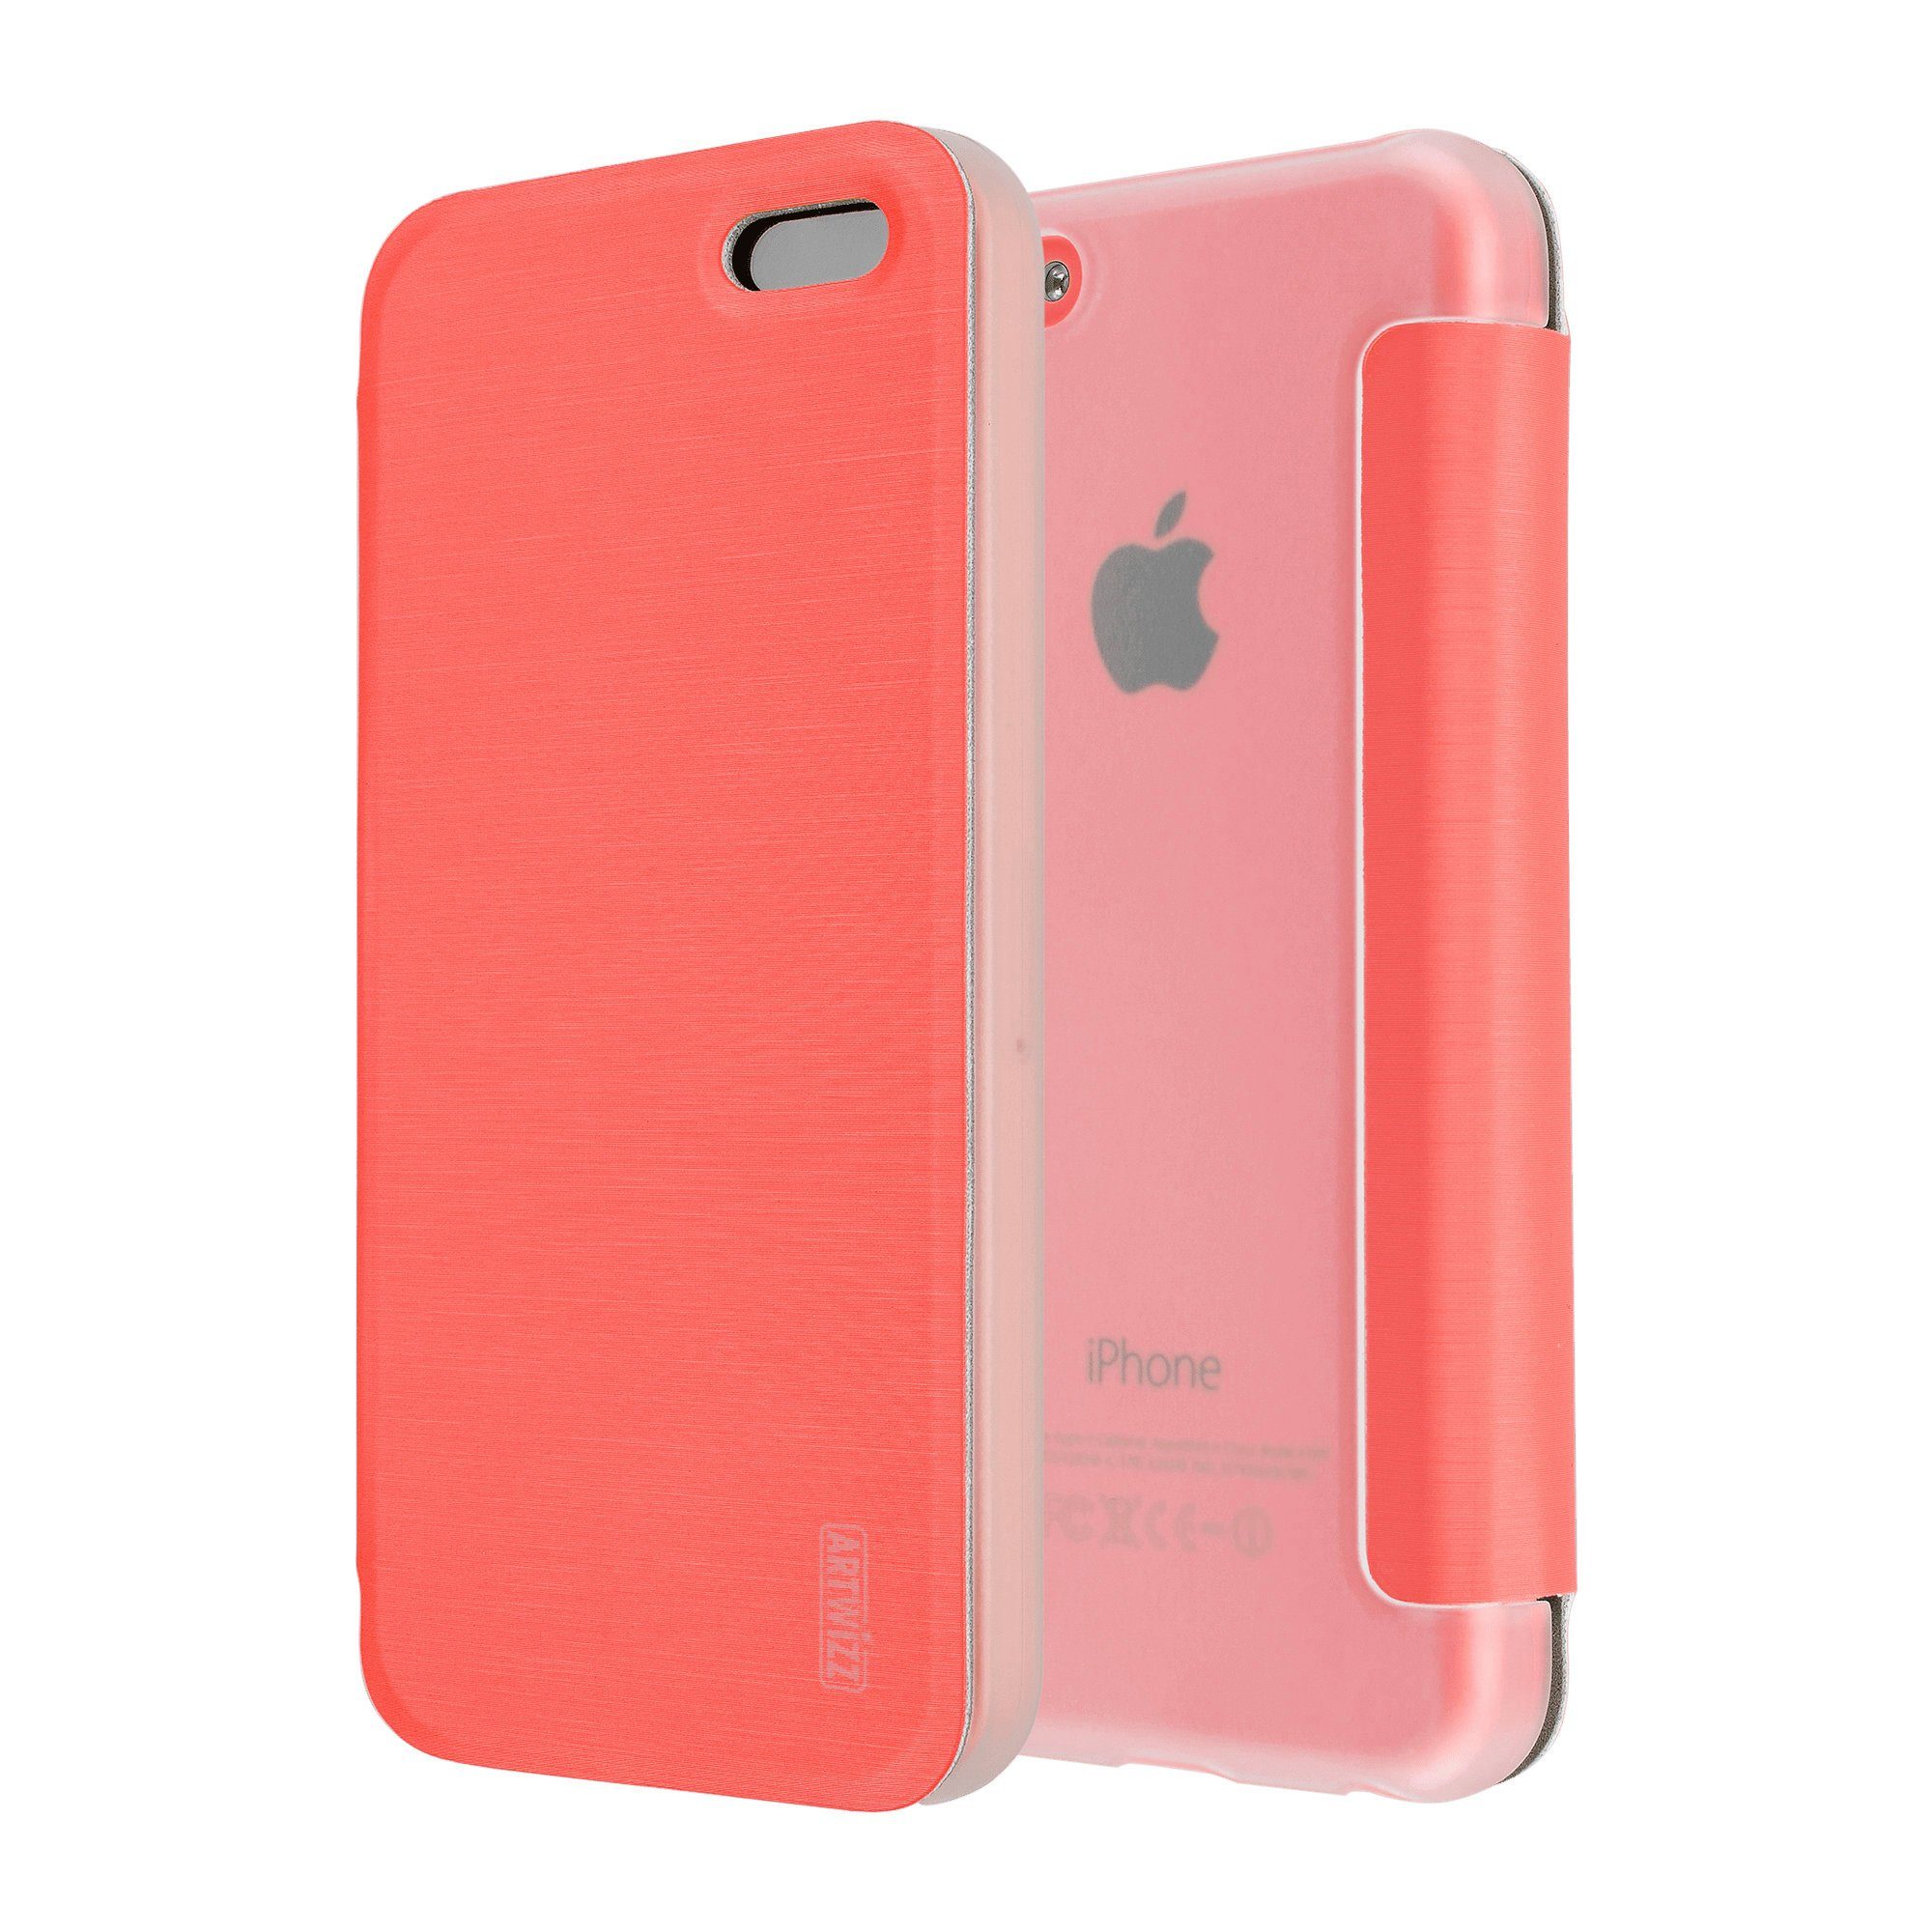 Artwizz Flip Case SmartJacket® for iPhone 5c, coral, iPhone 5c